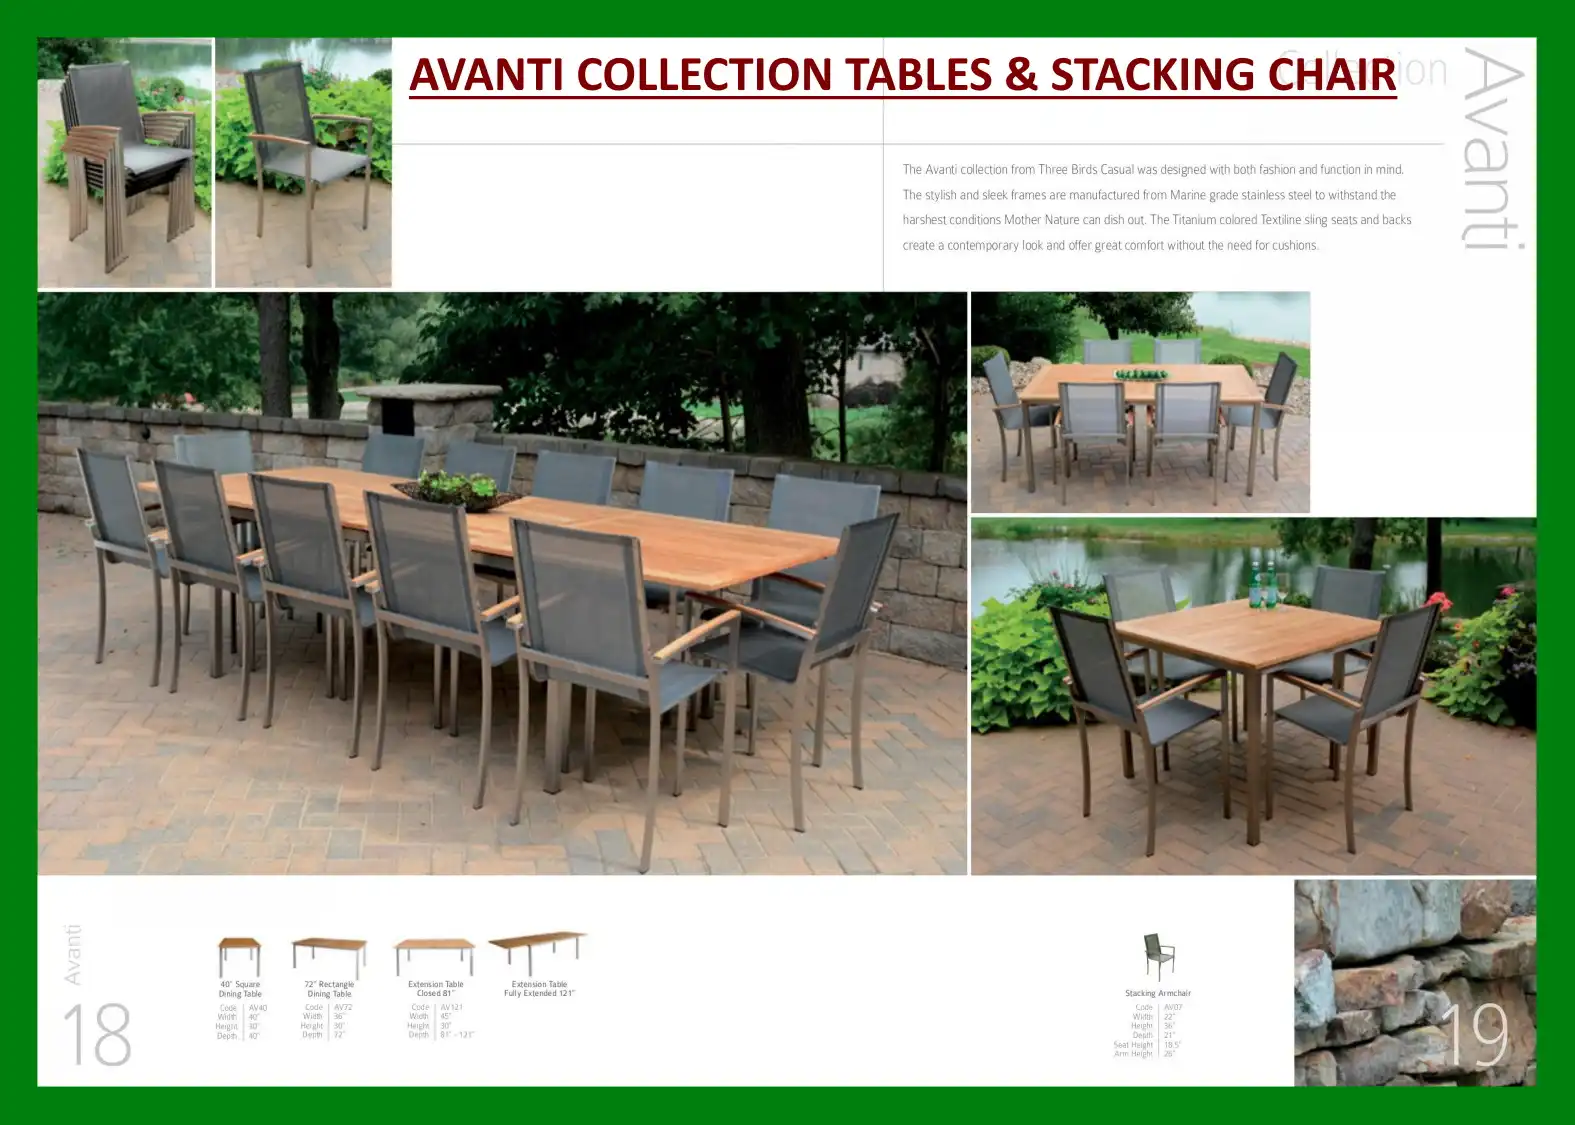 AVANTI COLLECTION TABLES & STACKING CHAIR